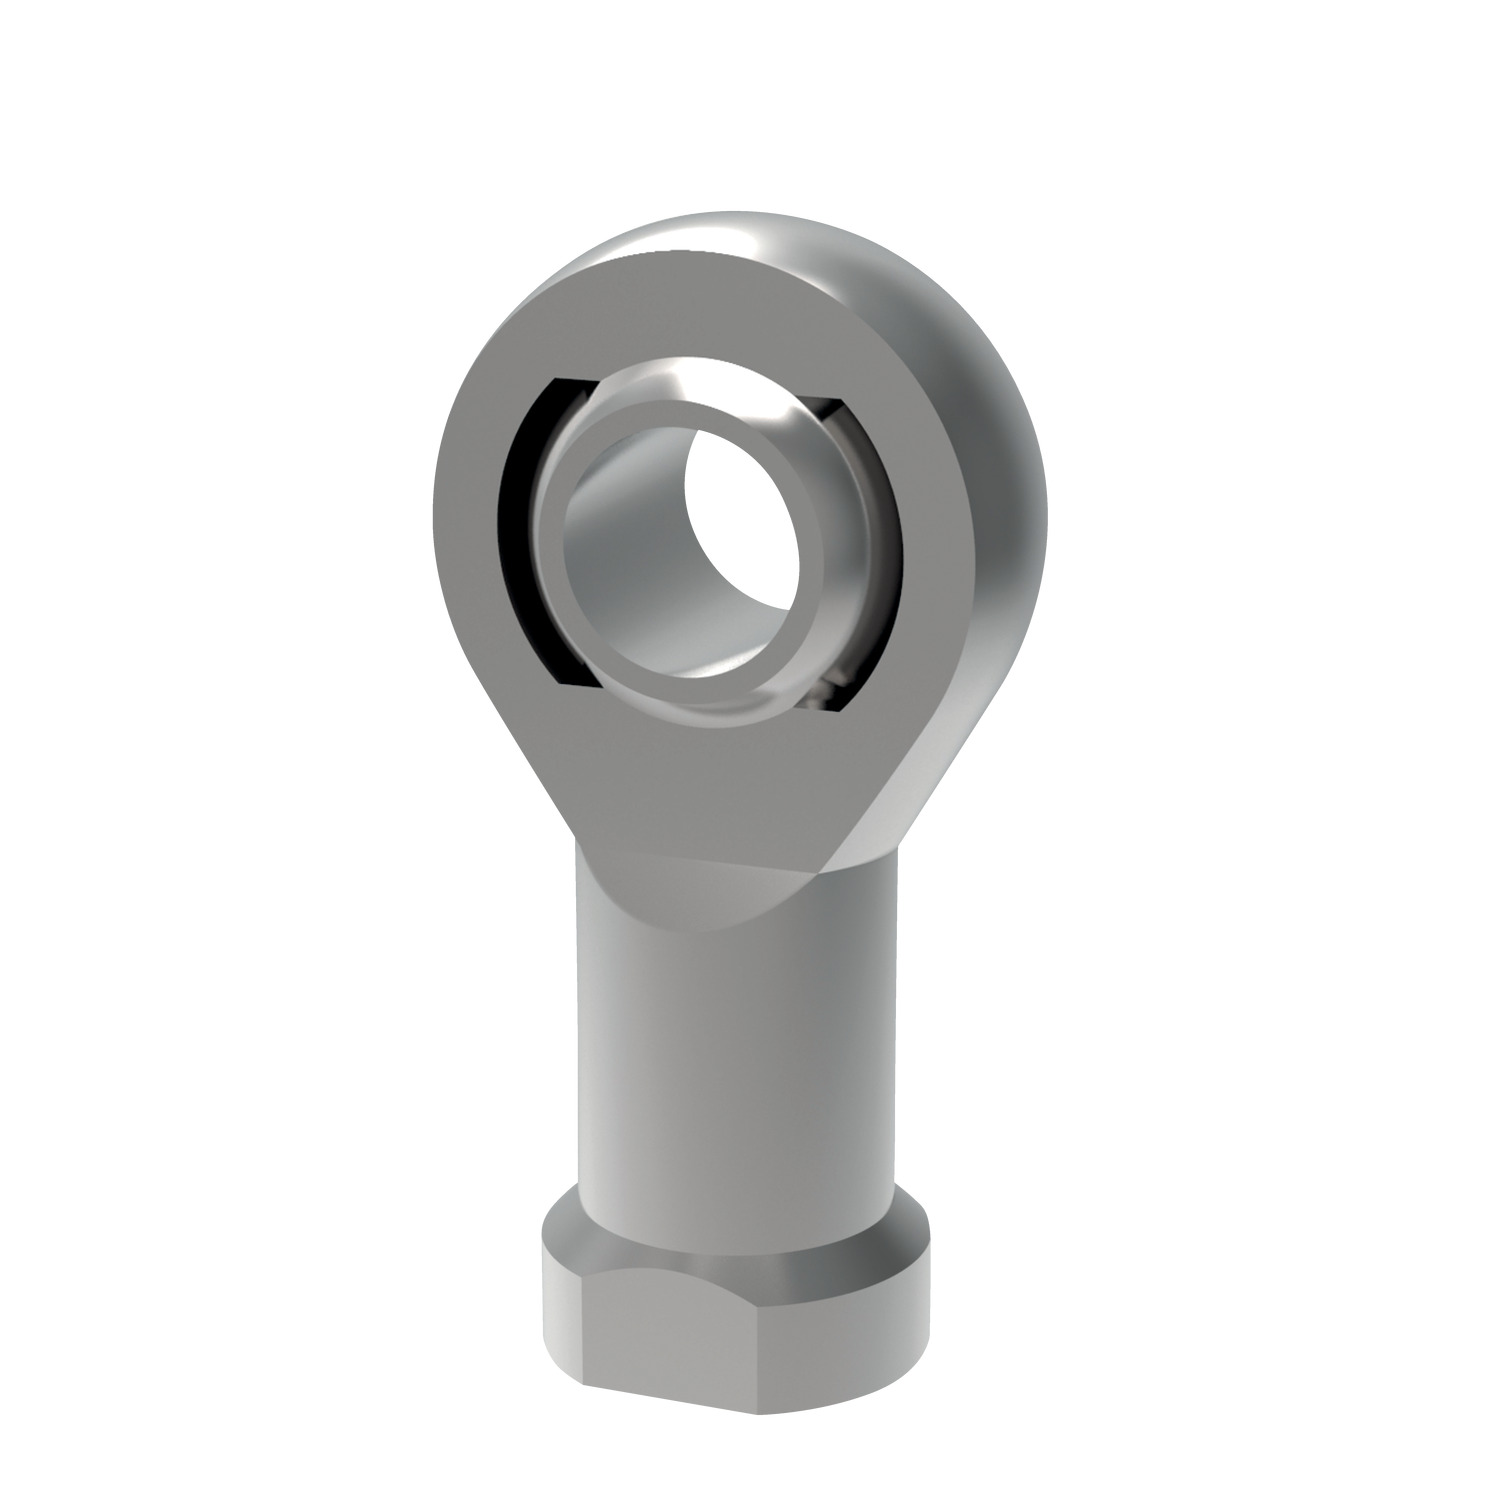 Stainless Heavy-Duty Rod Ends - Female Our heavy duty female rod ends are made from A2 stainless steel, with the the race of the rod end made from a nylon/teflon/glass compound. Maintenance free.